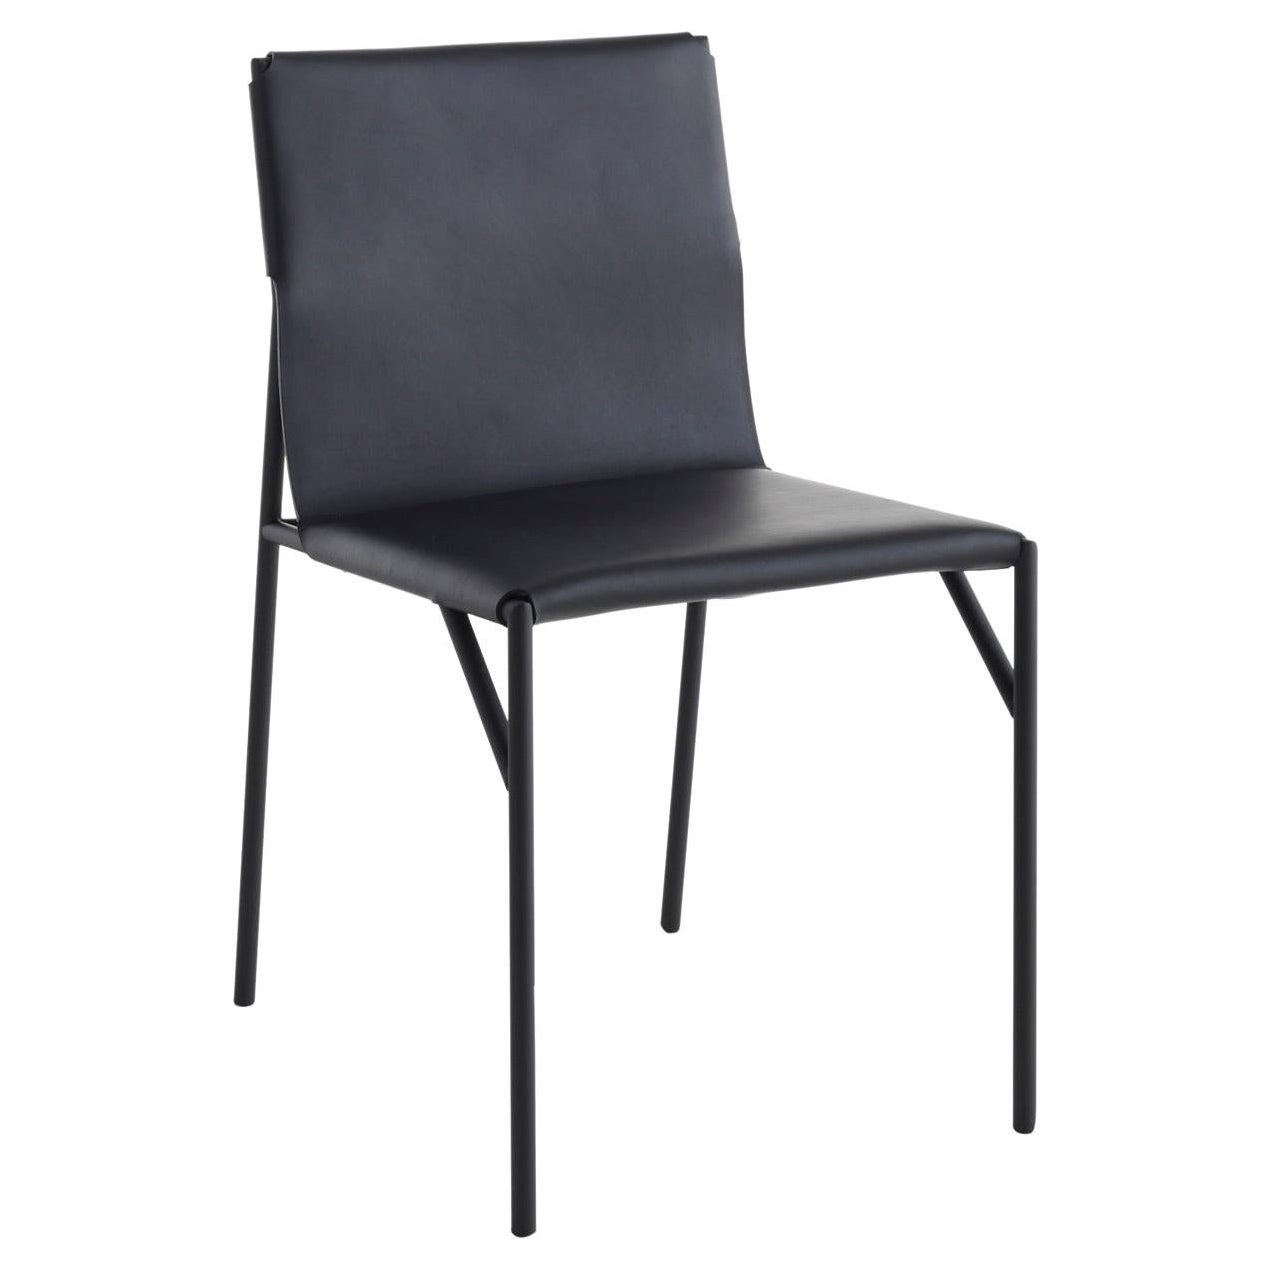 Tout Le Jour Black Leather Chair by Marc Thorpe For Sale